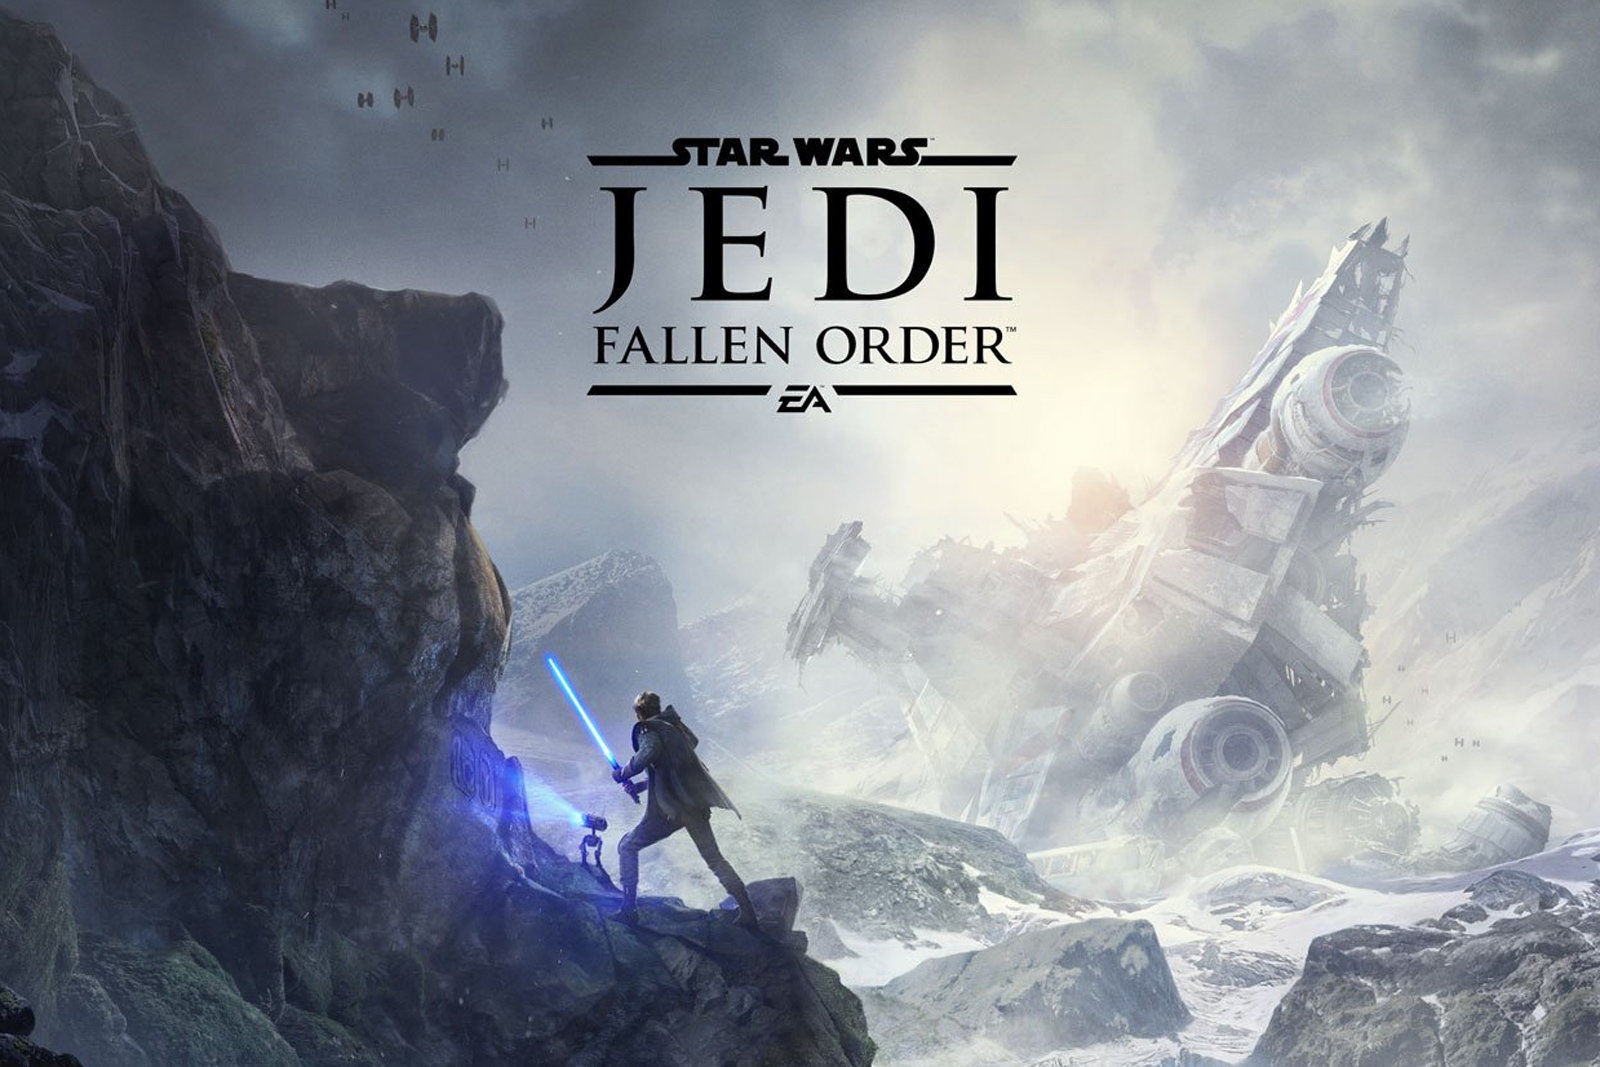 'Star Wars Jedi: Fallen Order' trailer teases new story details | DeviceDaily.com